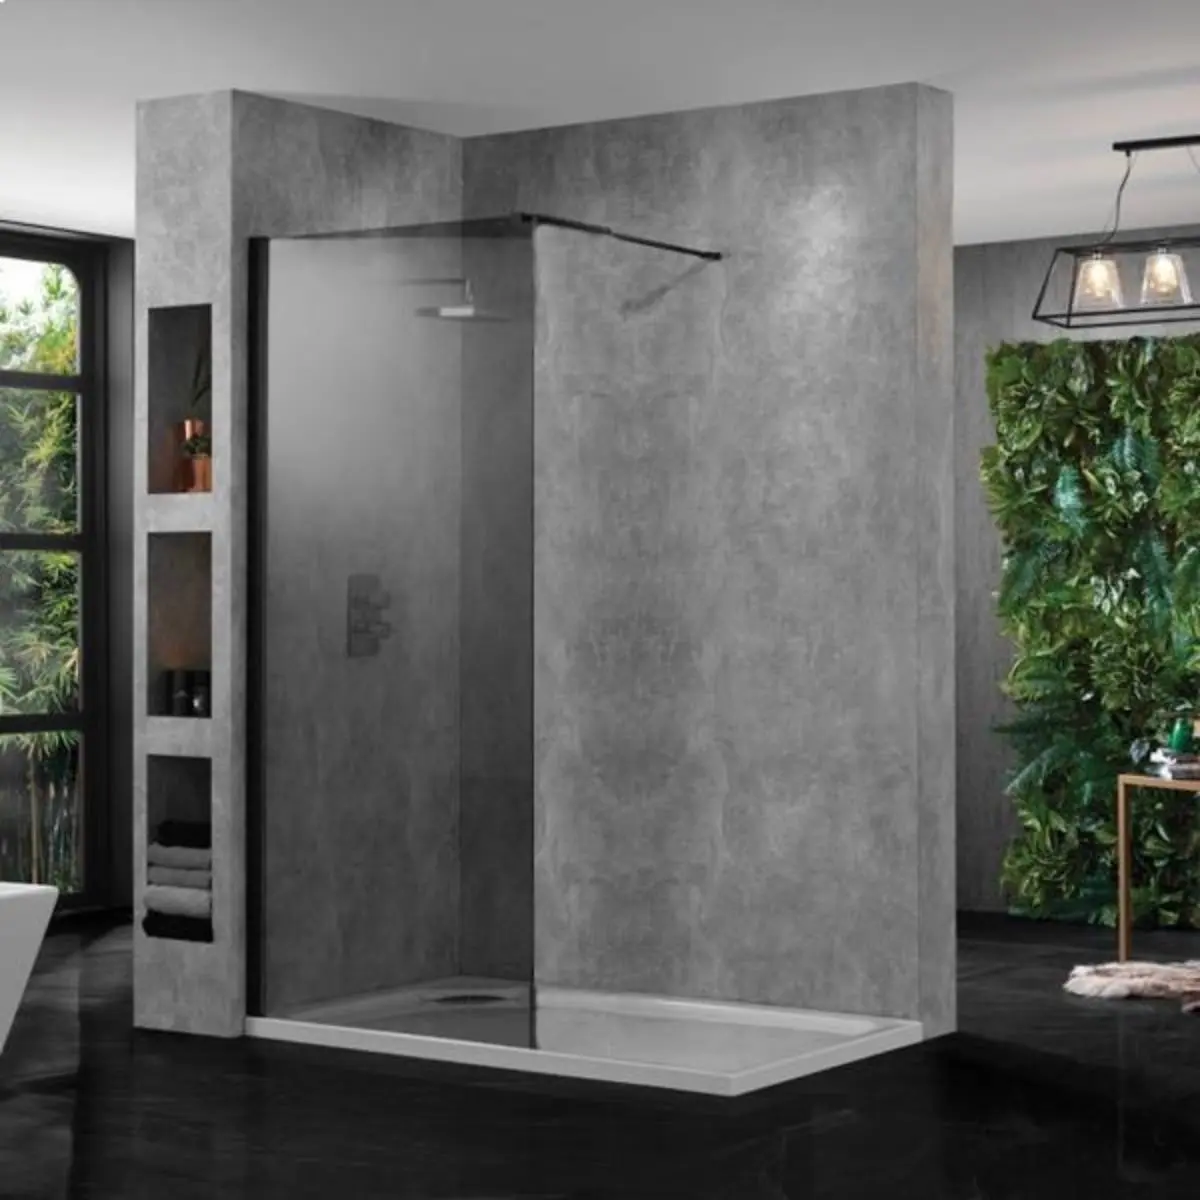 10mm smoked glass shower screen - What is the standard thickness of shower glass in MM